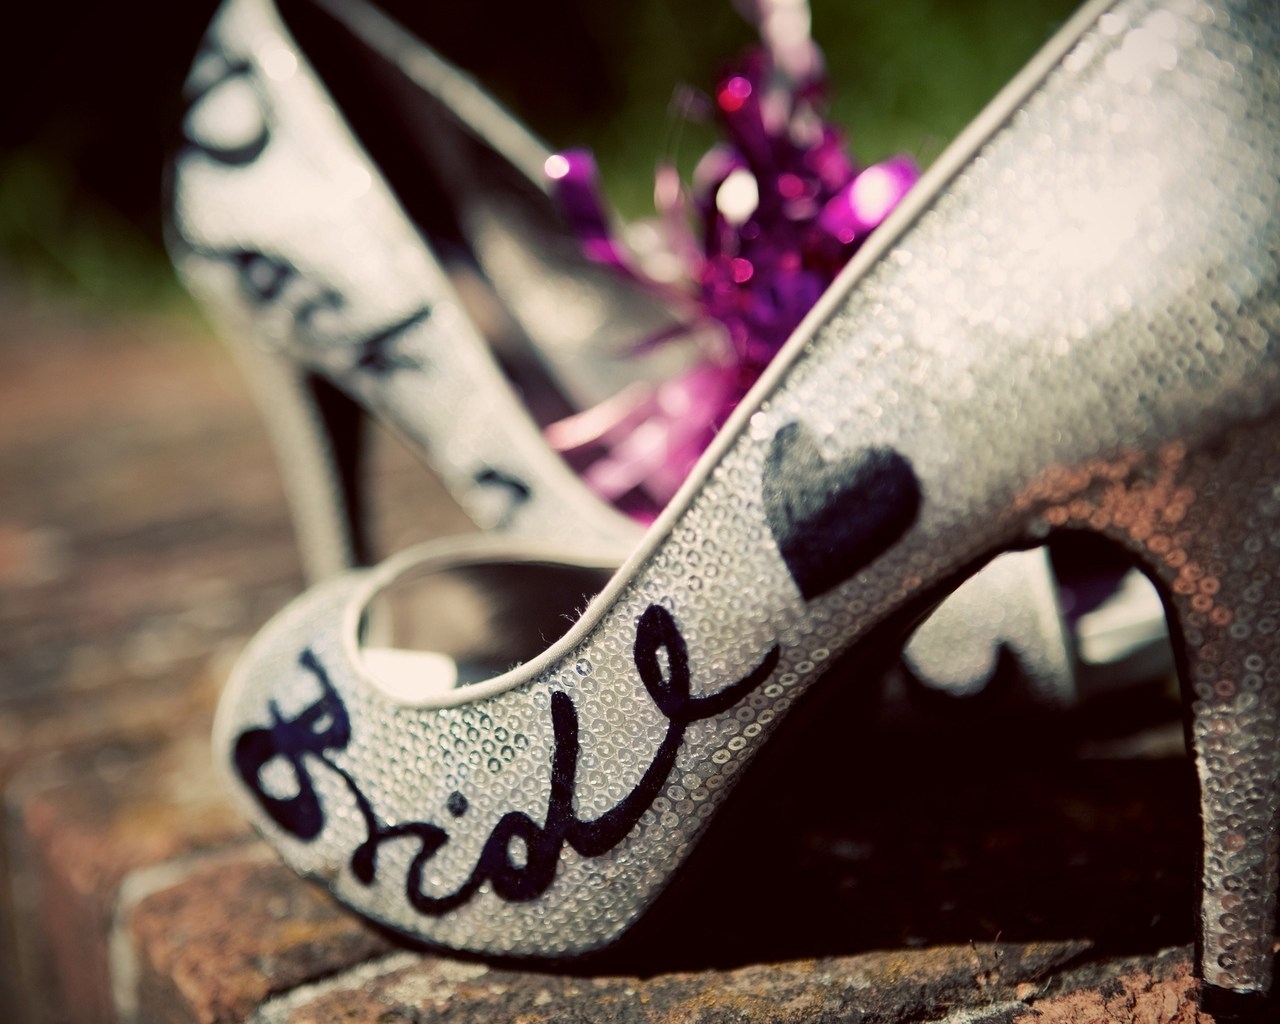 Bride Shoes for 1280 x 1024 resolution